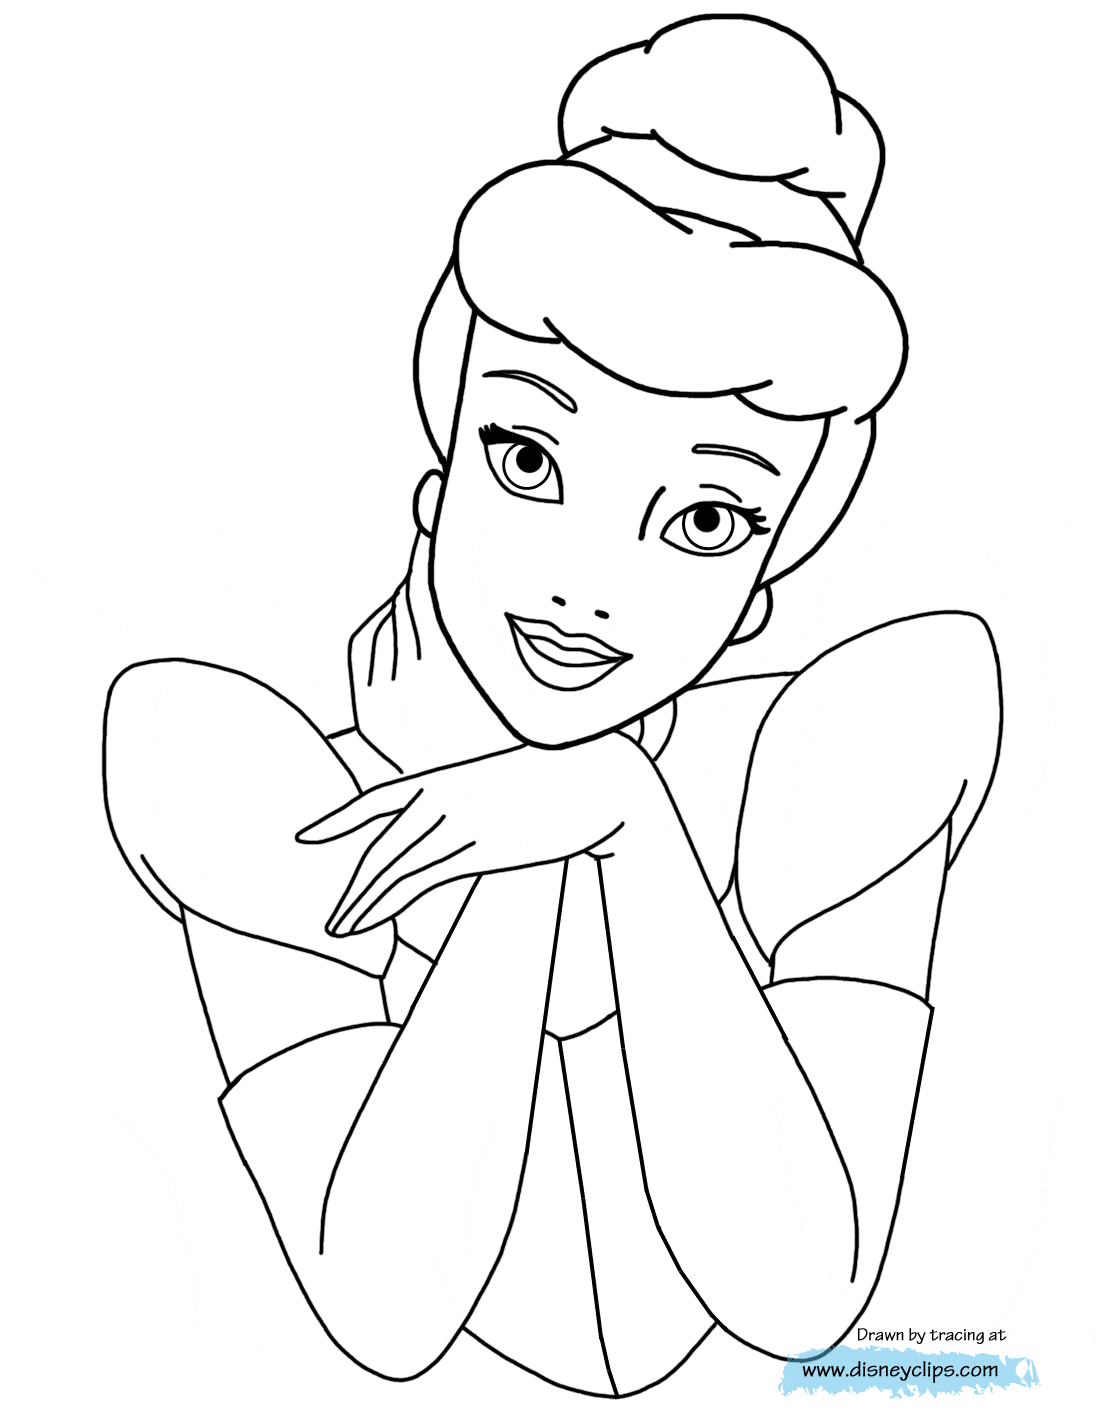 cinderella colouring pages free disney39s cinderella coloring pages disneyclipscom cinderella pages free colouring 